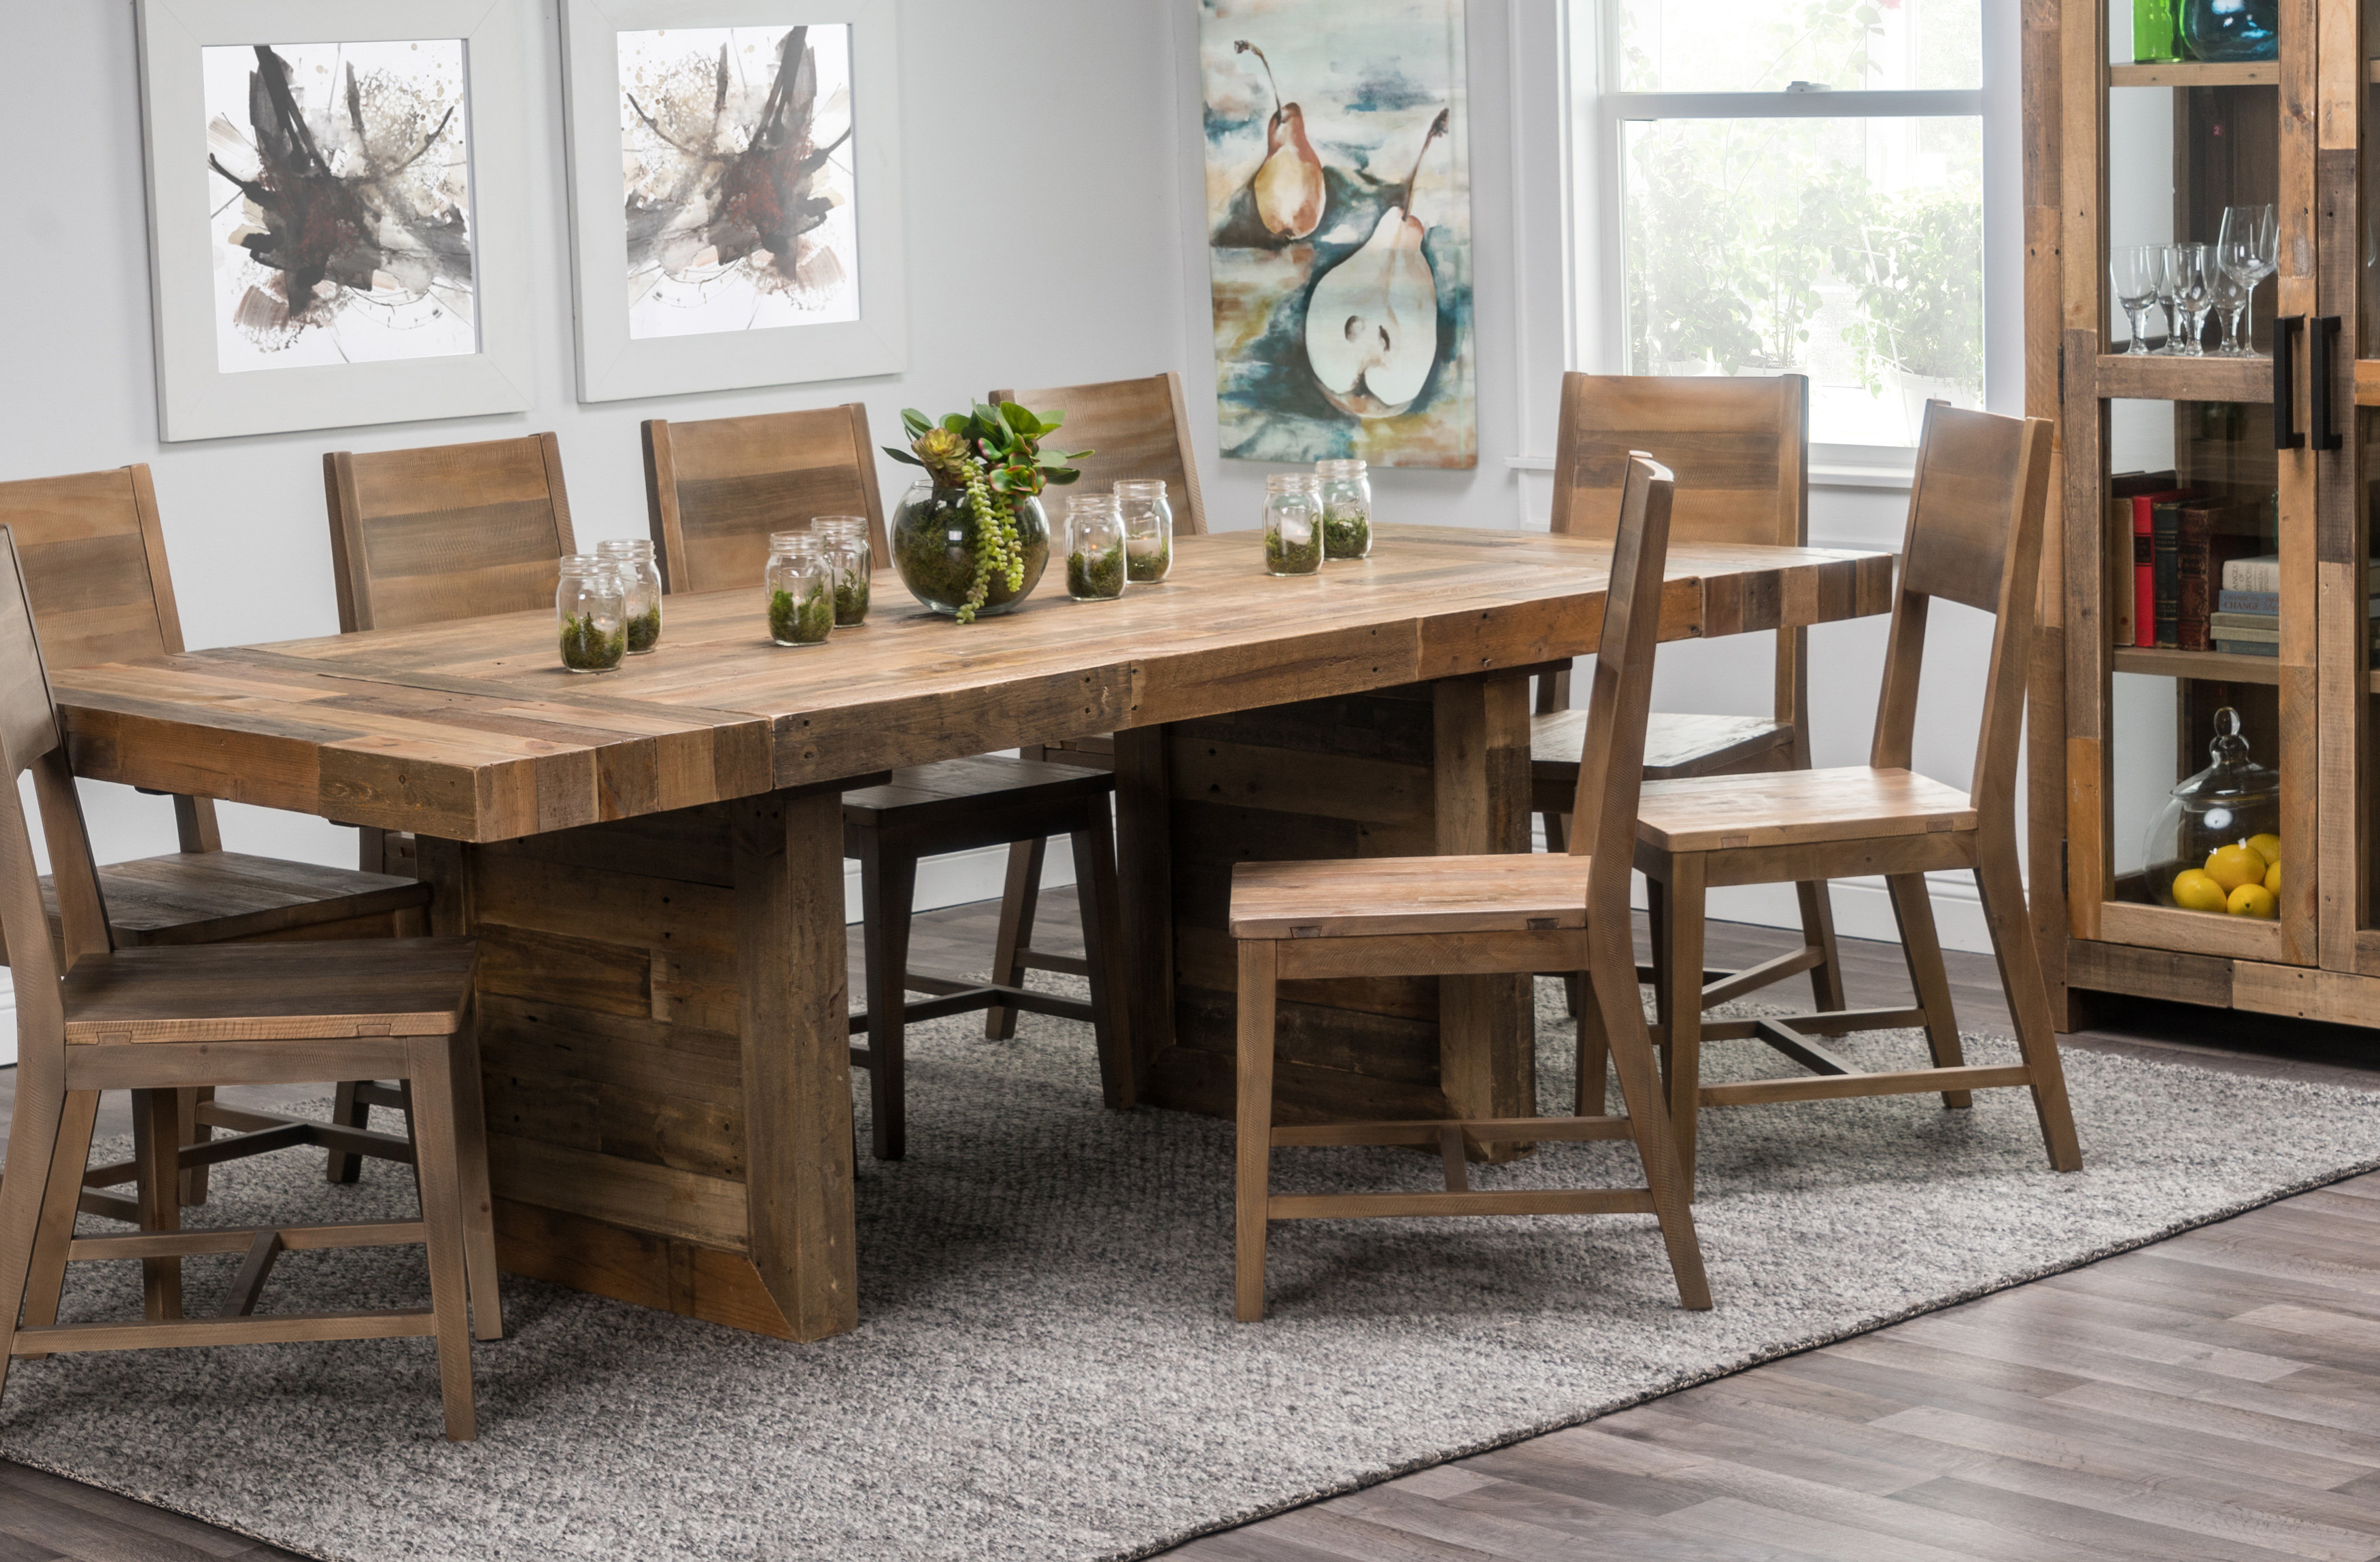 Dining Room Table Solid Wood Seats 12